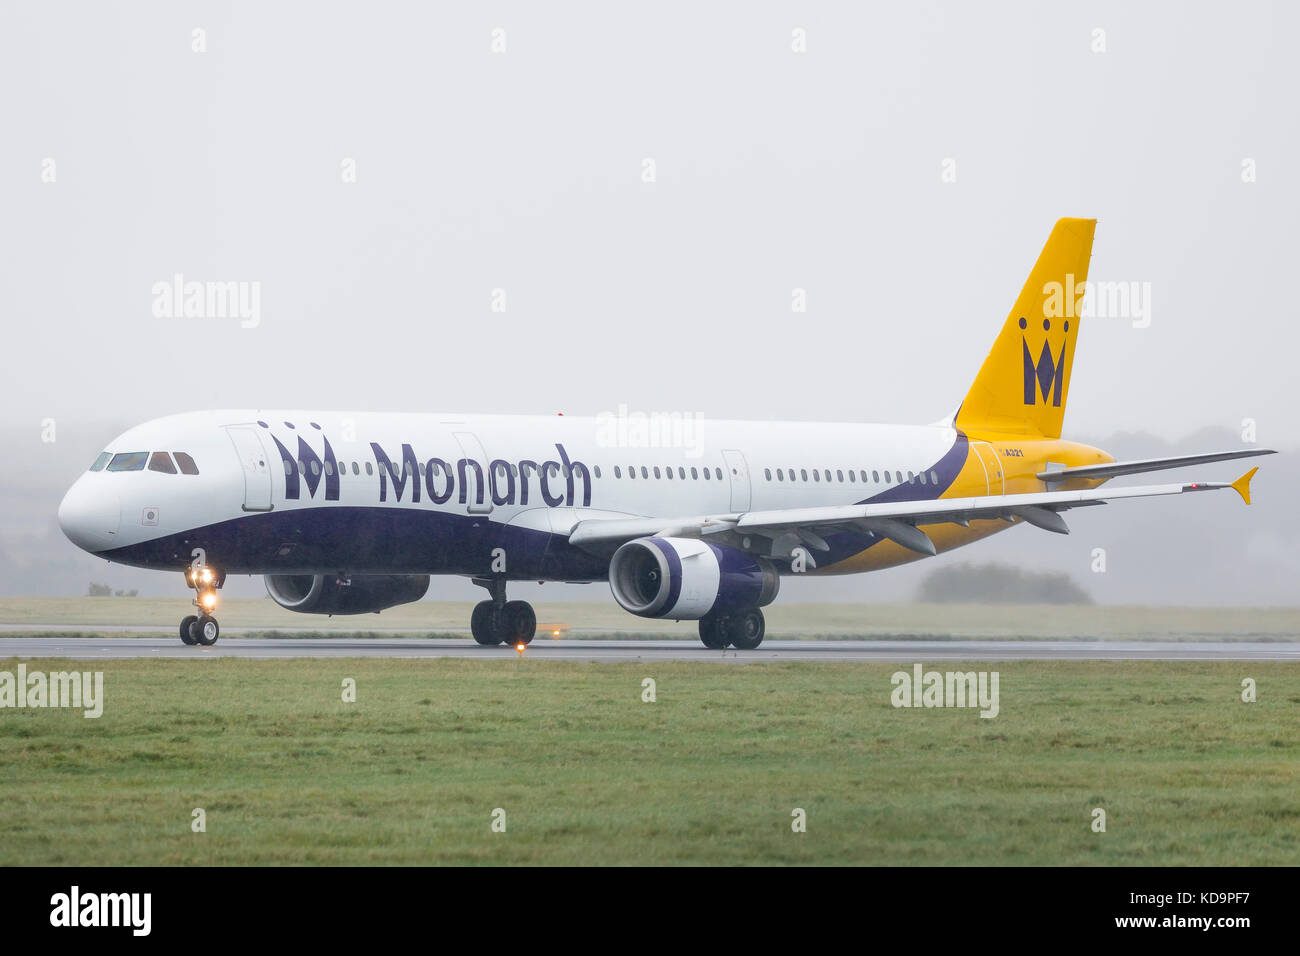 Luton, Bedfordshire, UK. . 11th Oct, 2017. Airbus A321 aircraft, G-MARA, of Monarch Airlines takes off for the last time from Luton on Wednesday 11th October 2017 following the collapse of UK based carrier the previous week on Monday 2nd October 2017. Credit: Nick Whittle/Alamy Live News Stock Photo